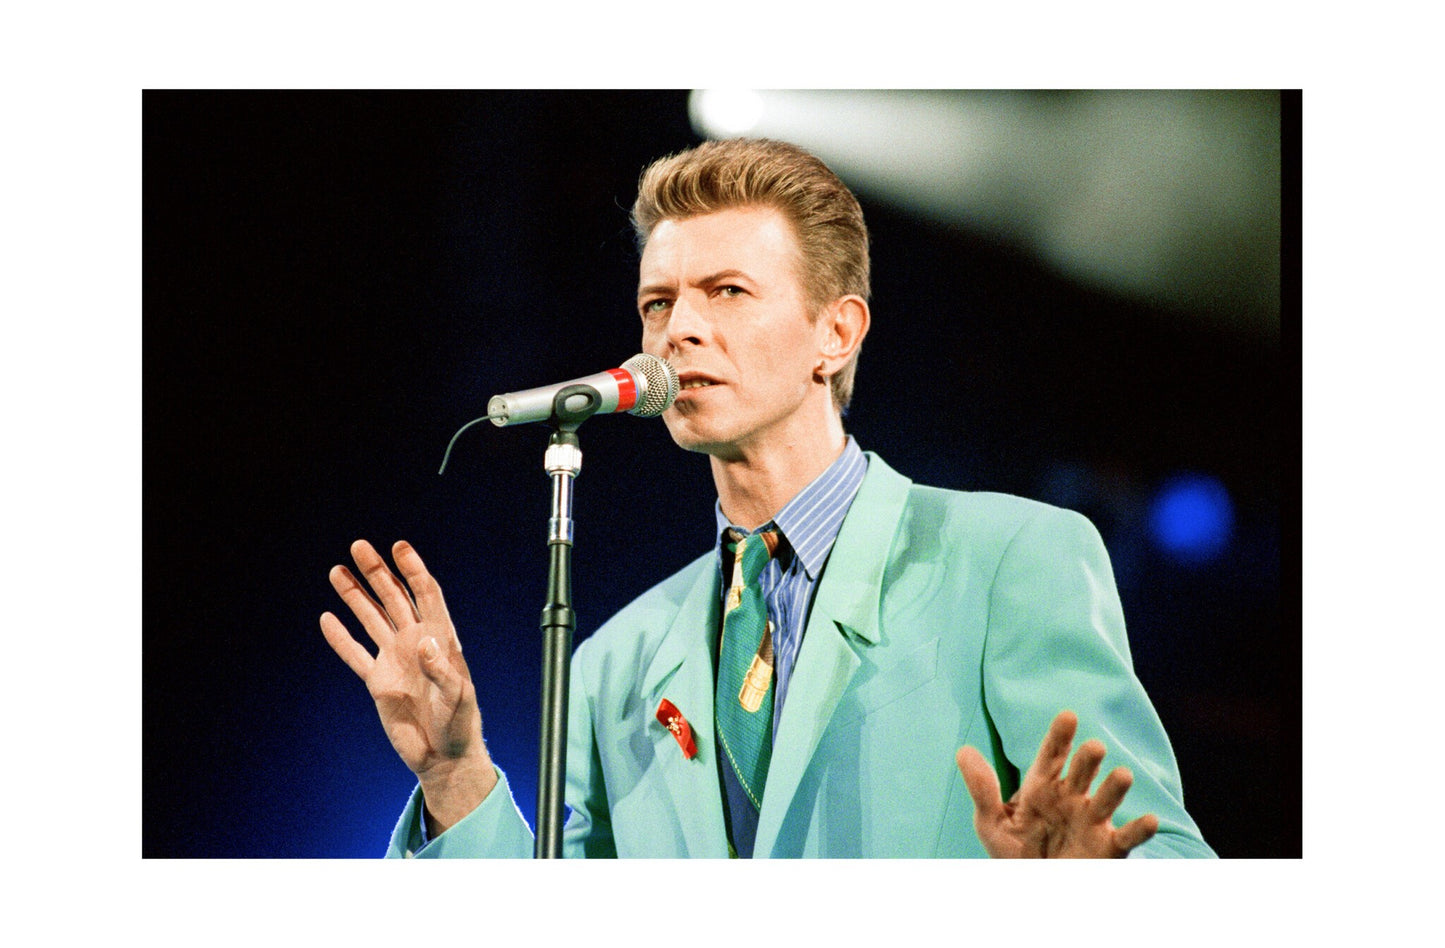 David Bowie - Singing In His Green Suit, England, 1992 Print 2